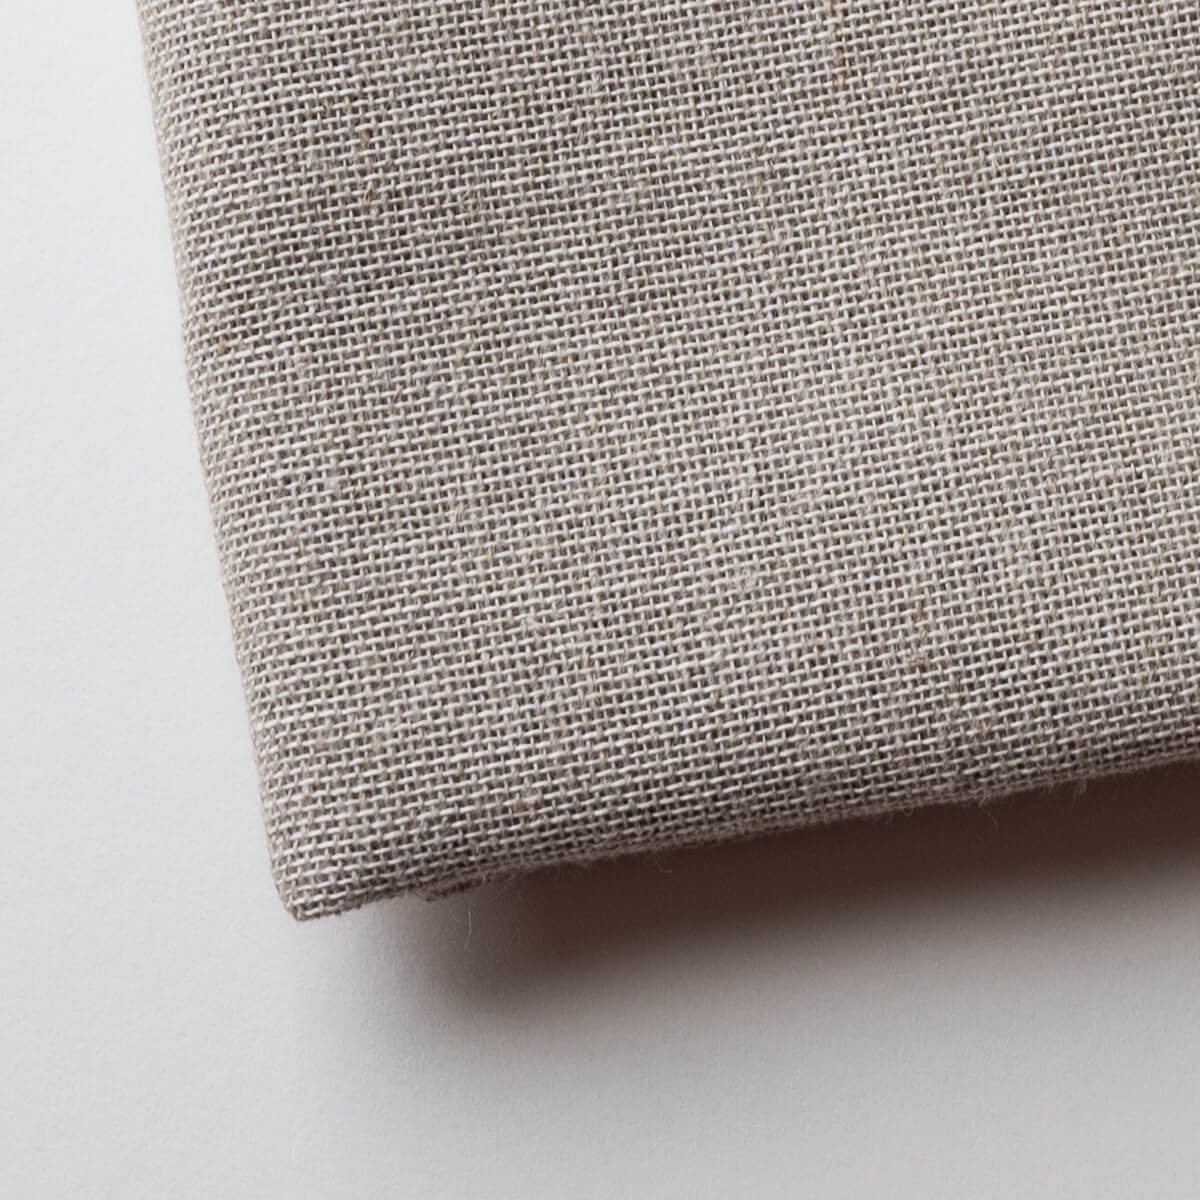 Enhance Your Craft with Our Reliable Monk Cloth Fabric for Punch